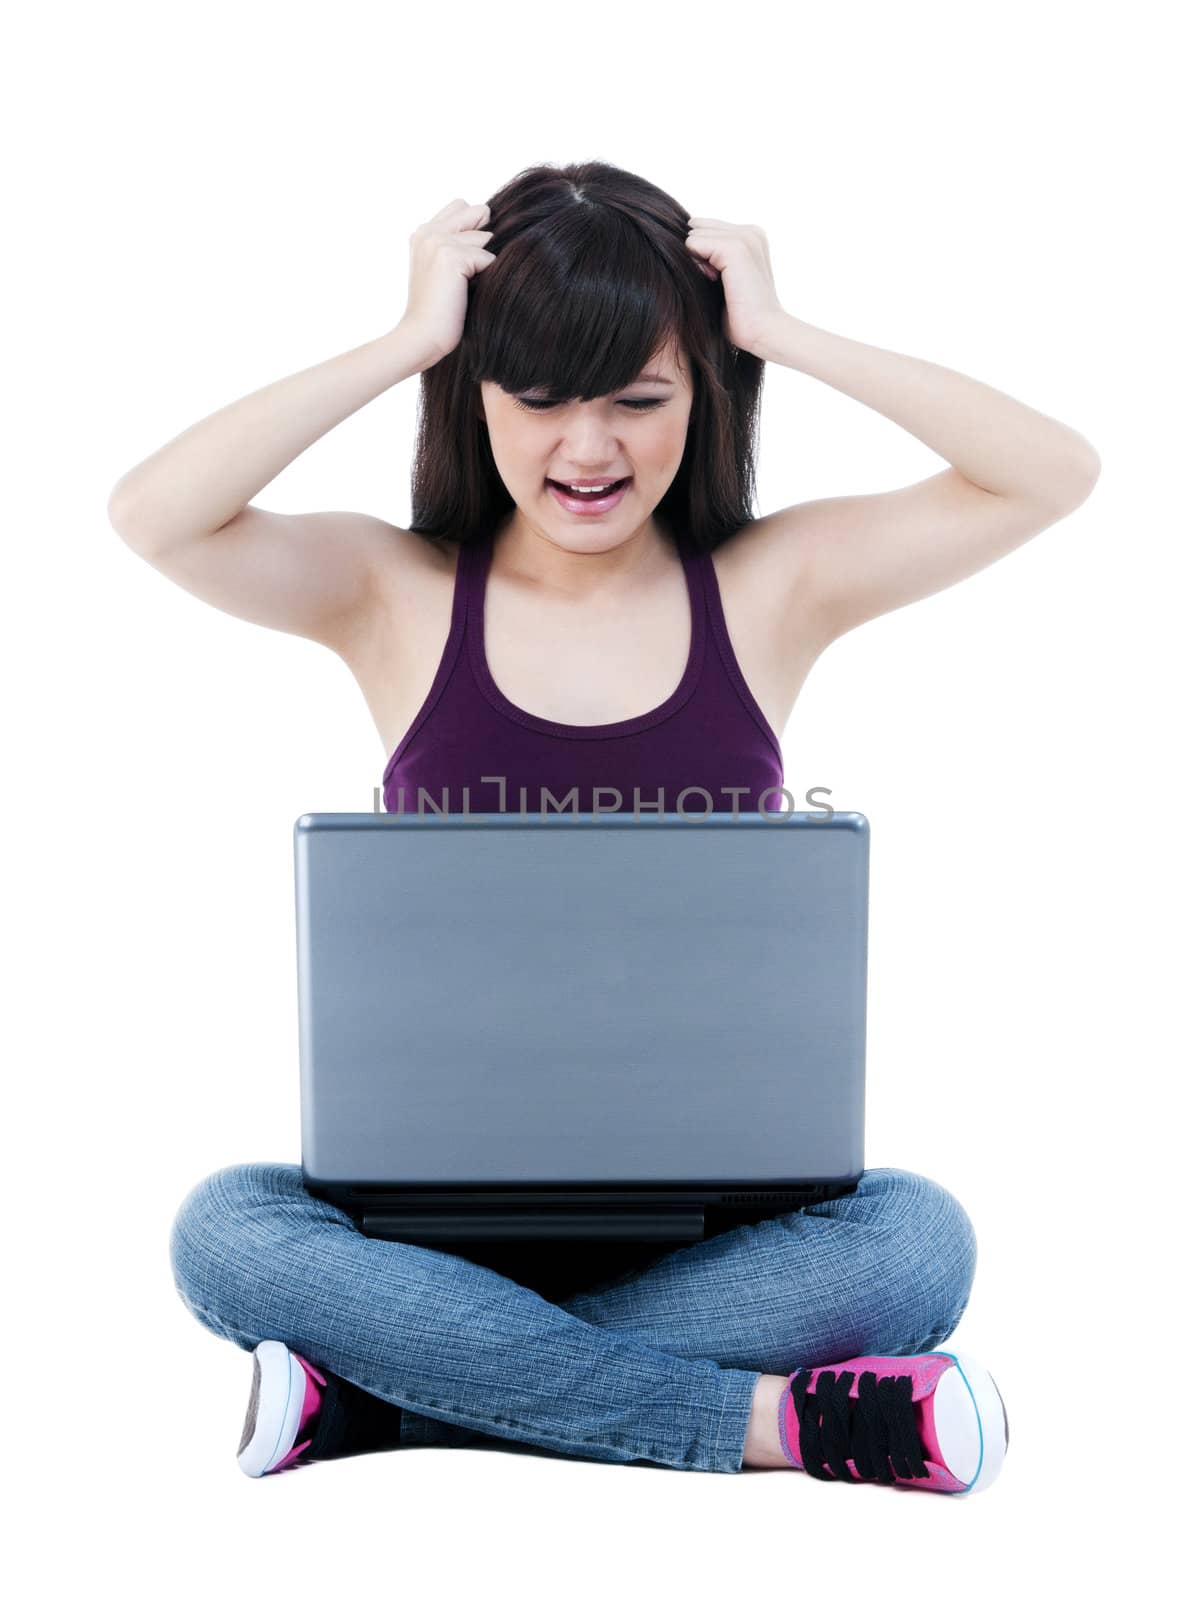 Frustrated young woman sitting on the floor with laptop and pulling her hair over white background.